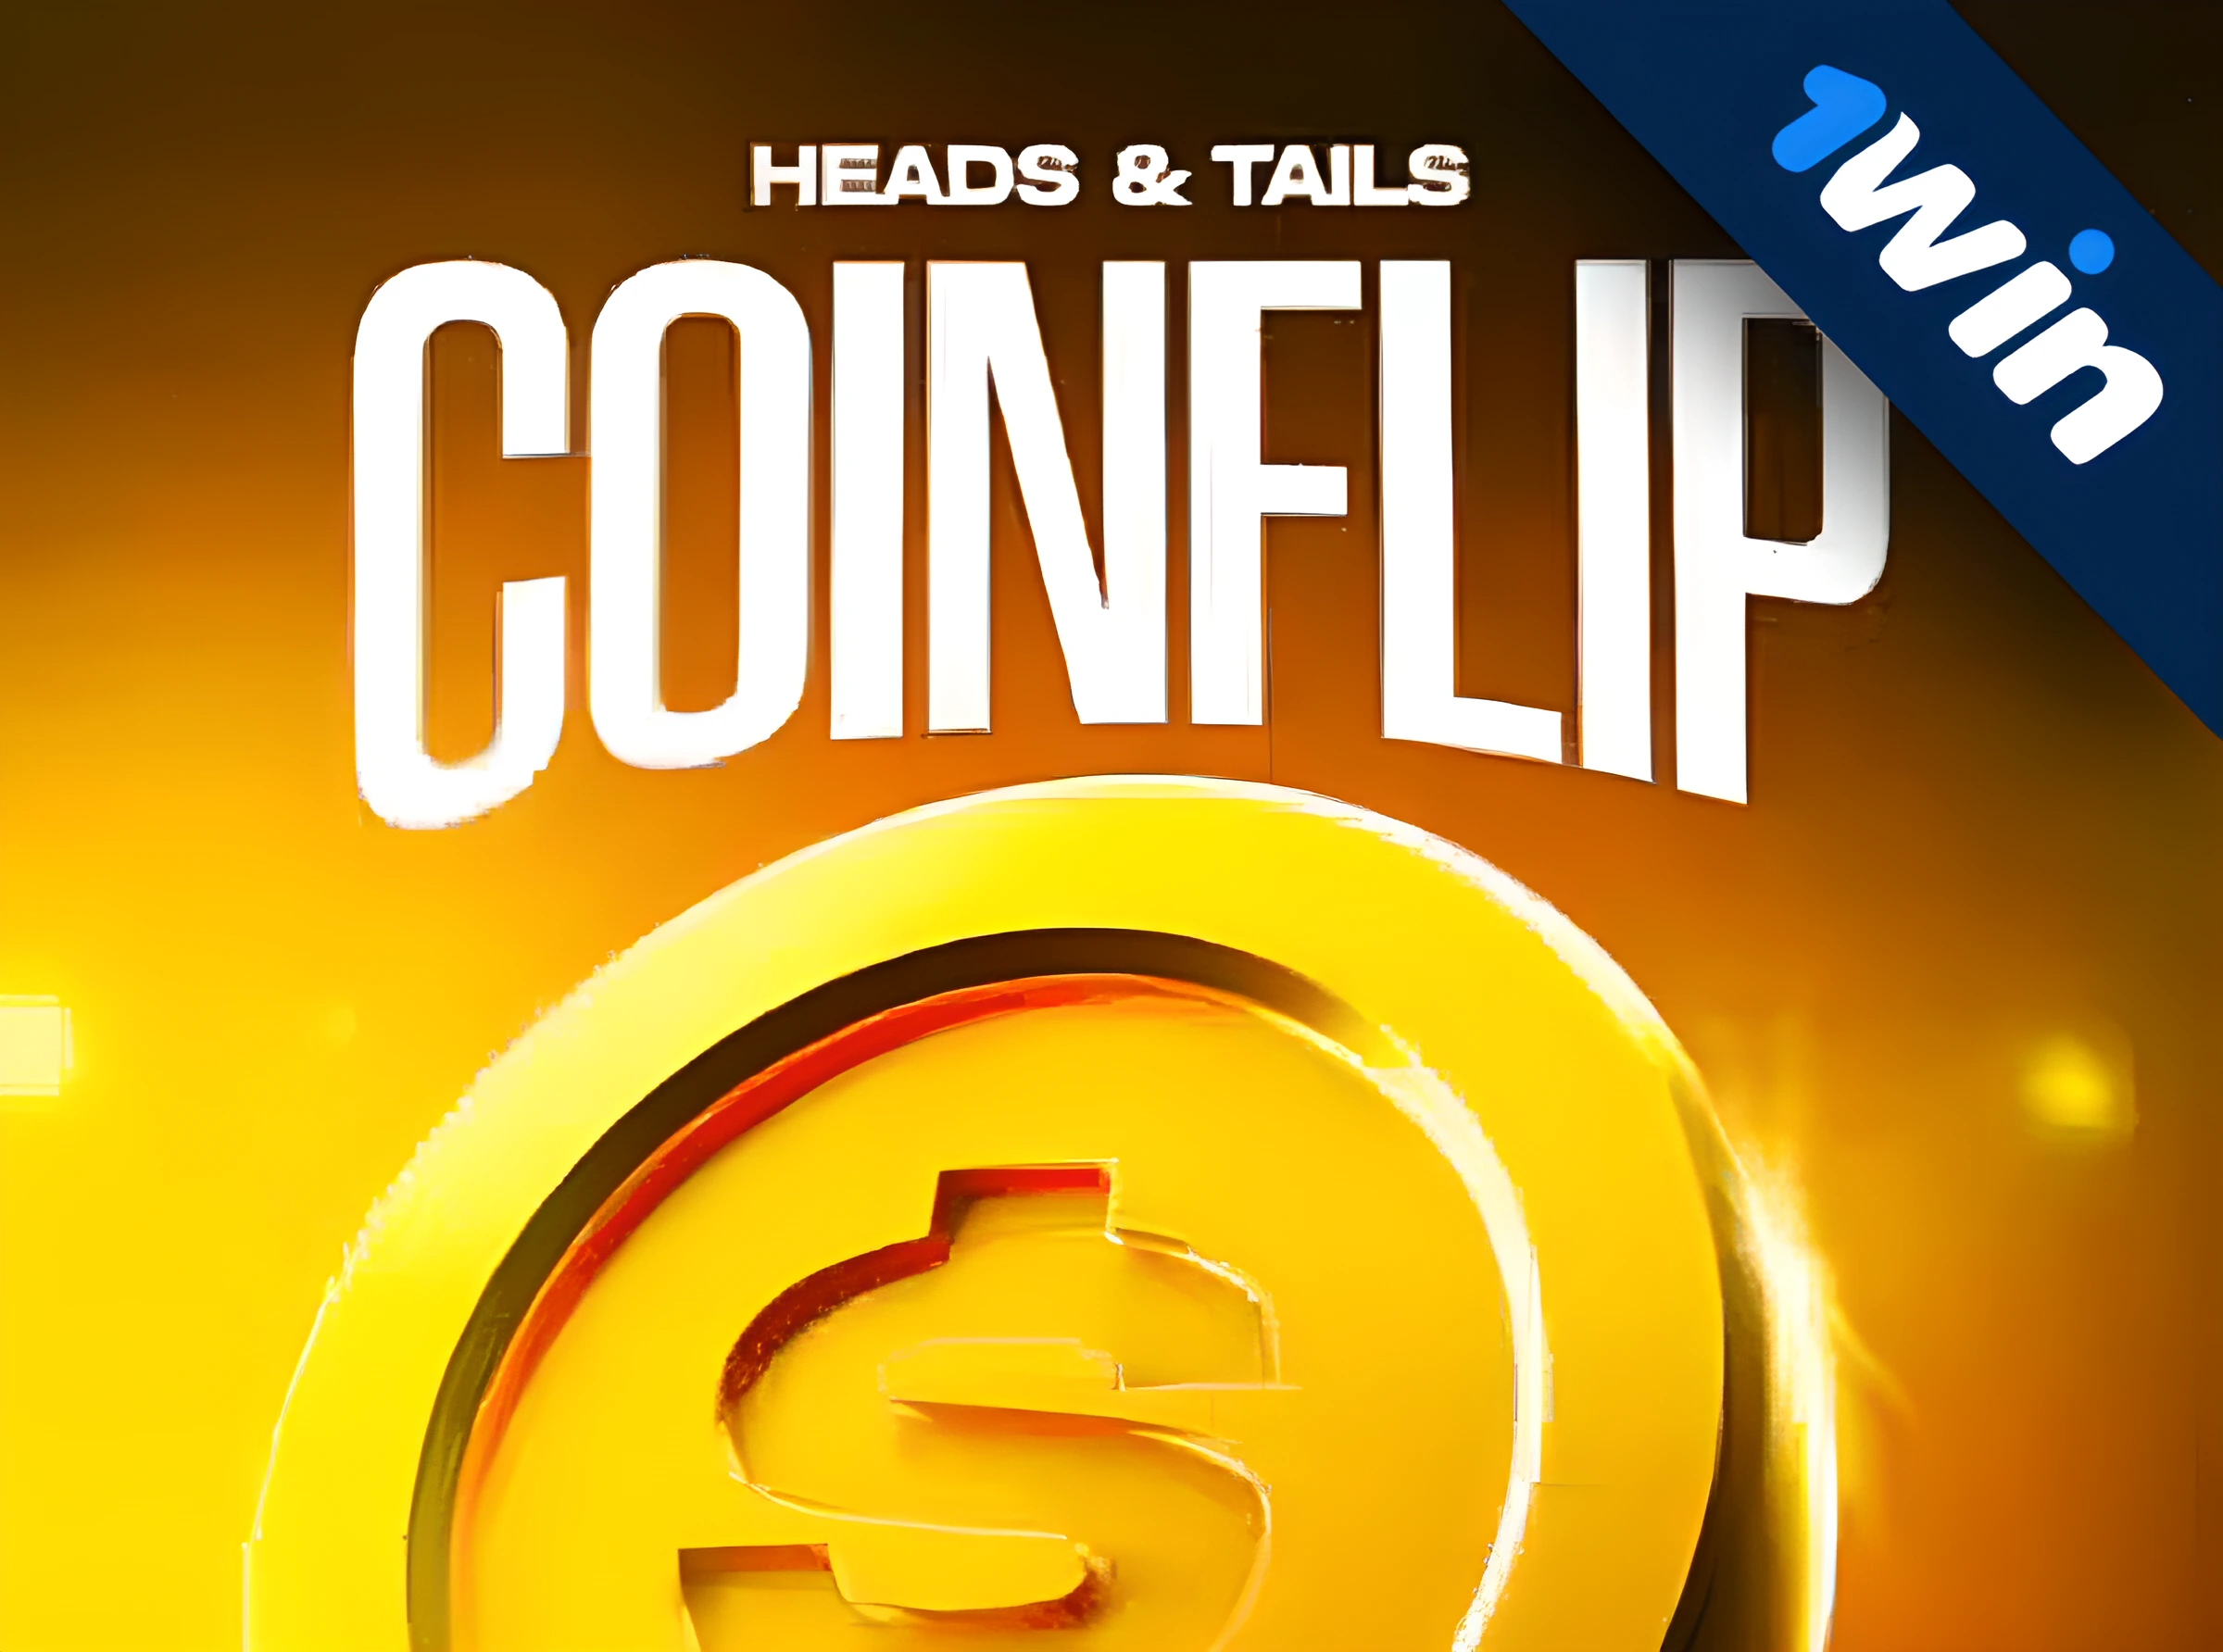 Coin Flip is a 1win exclusive game!